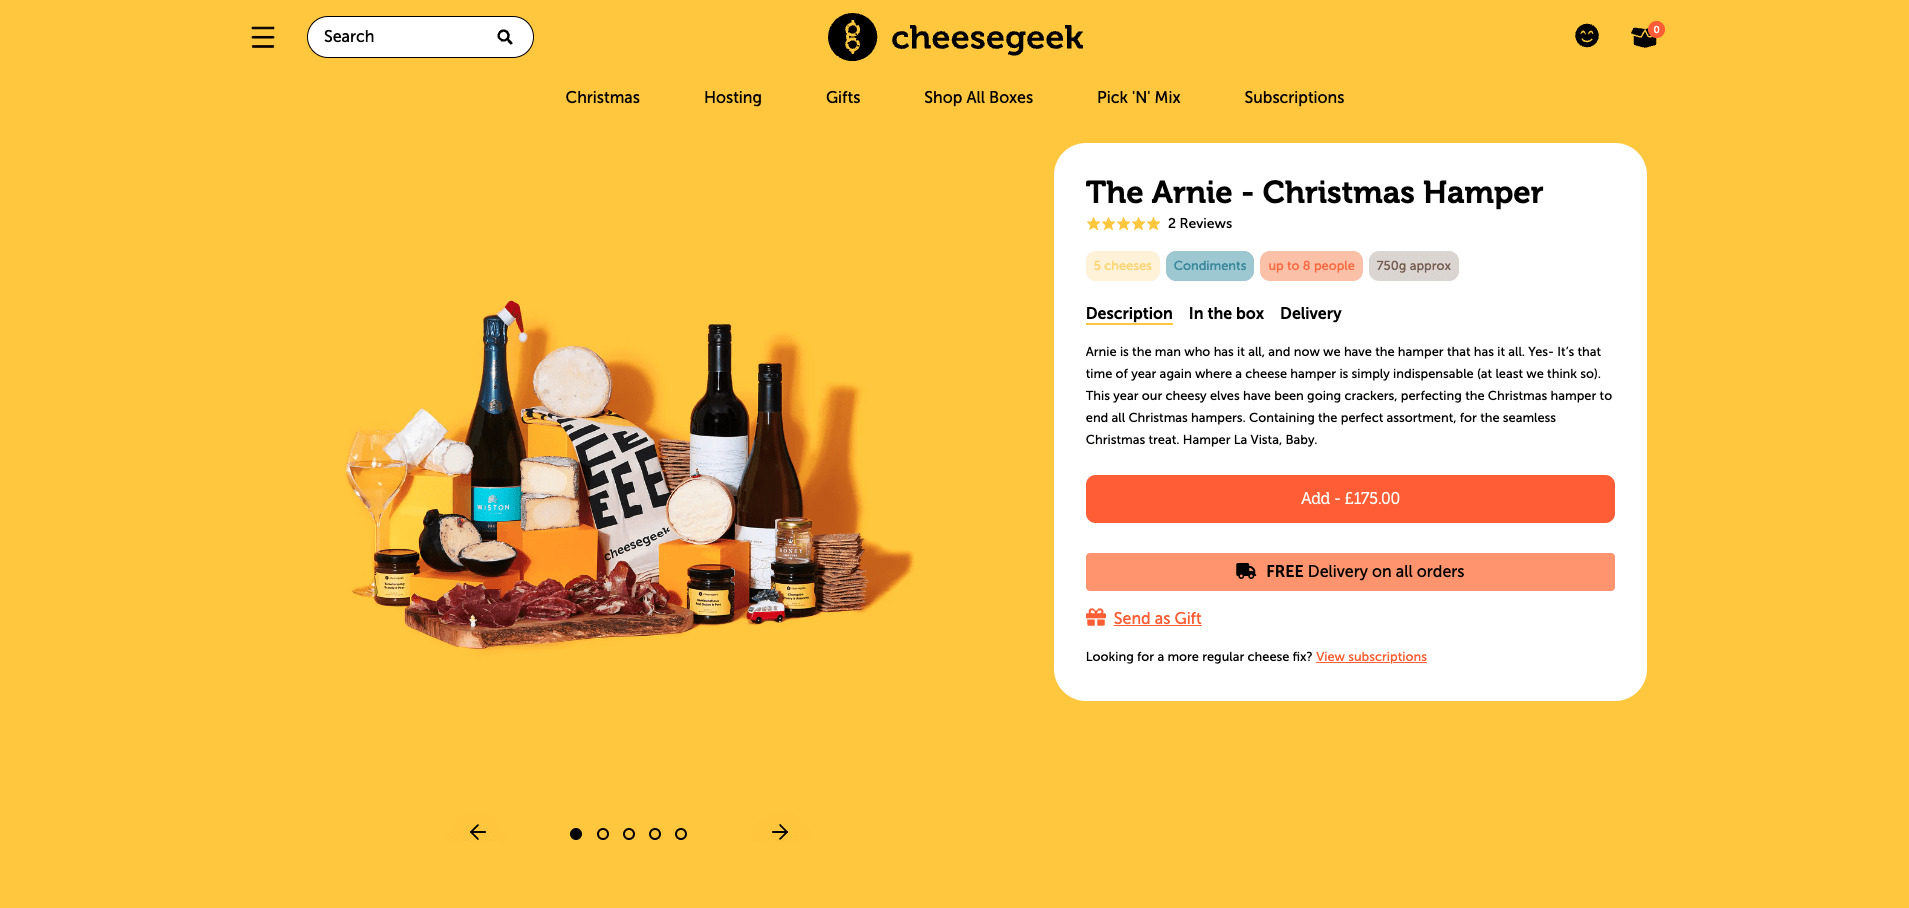 The Cheese Geek Christmas Hamper holiday gift guide